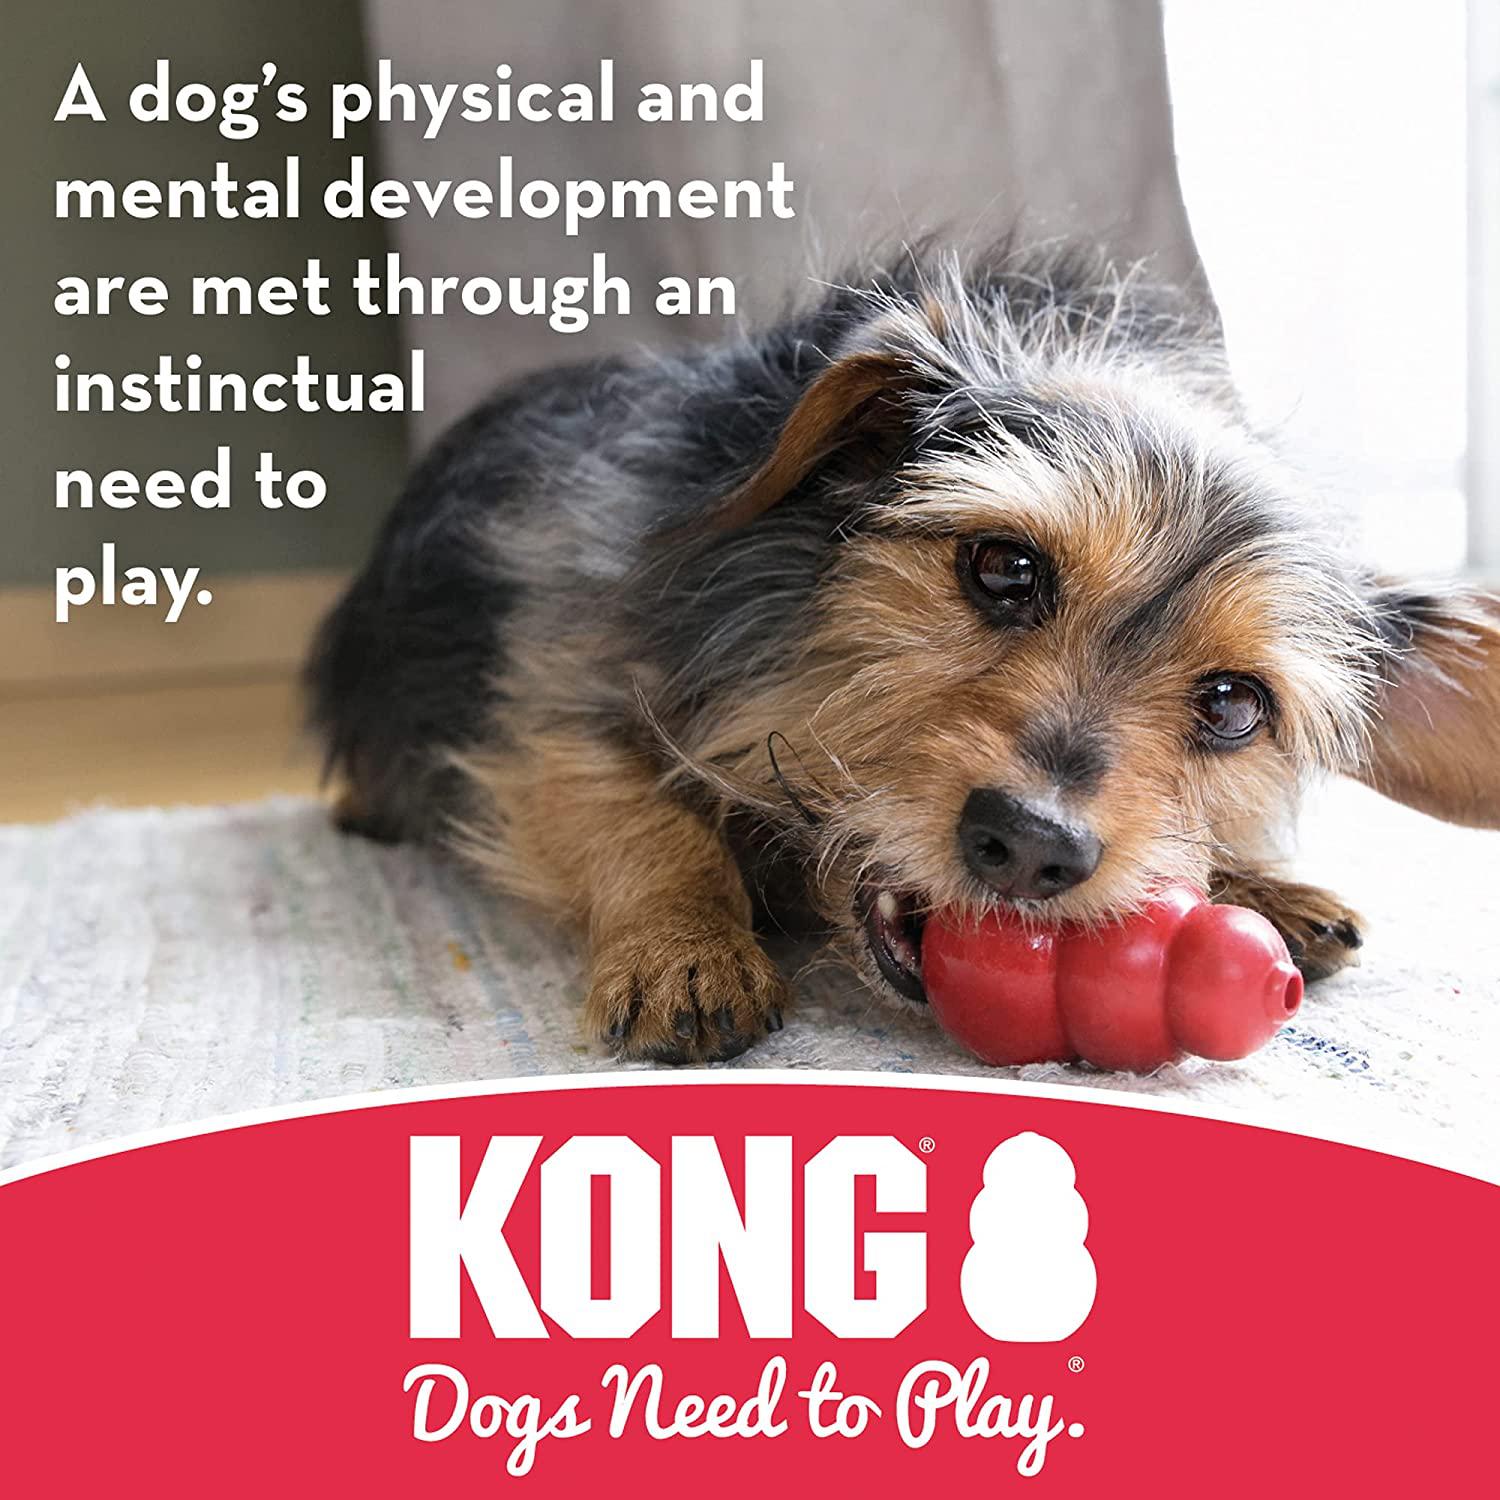 How to Stuff & Clean a Kong Toy 